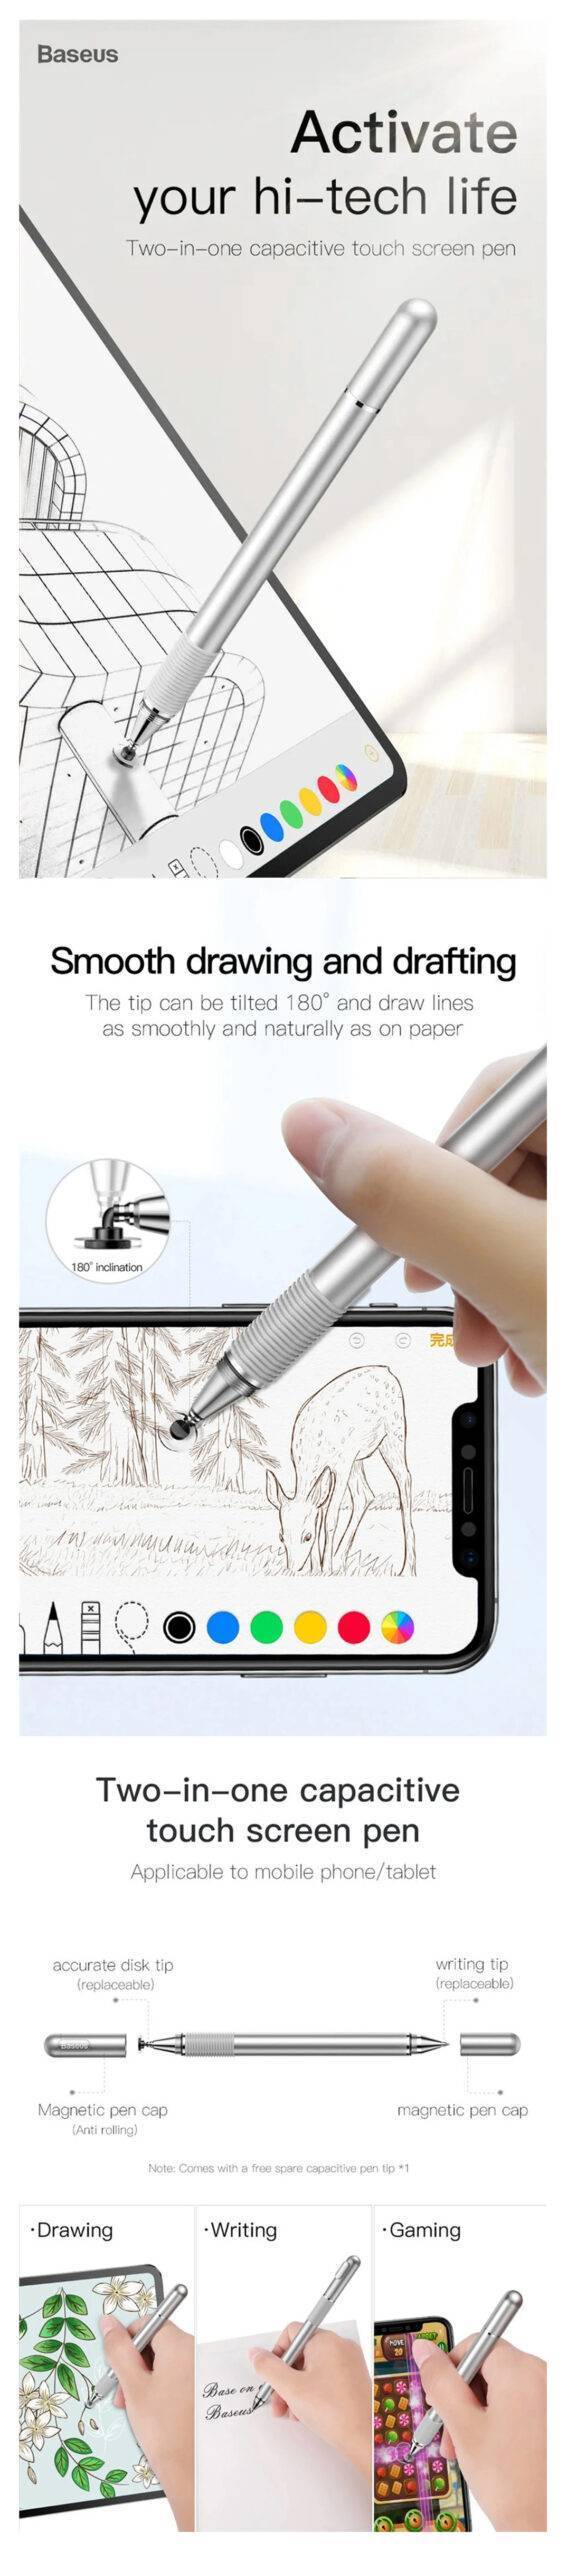 Baseus 2 in 1 Touch Screen Capacitive Stylus Pen d1